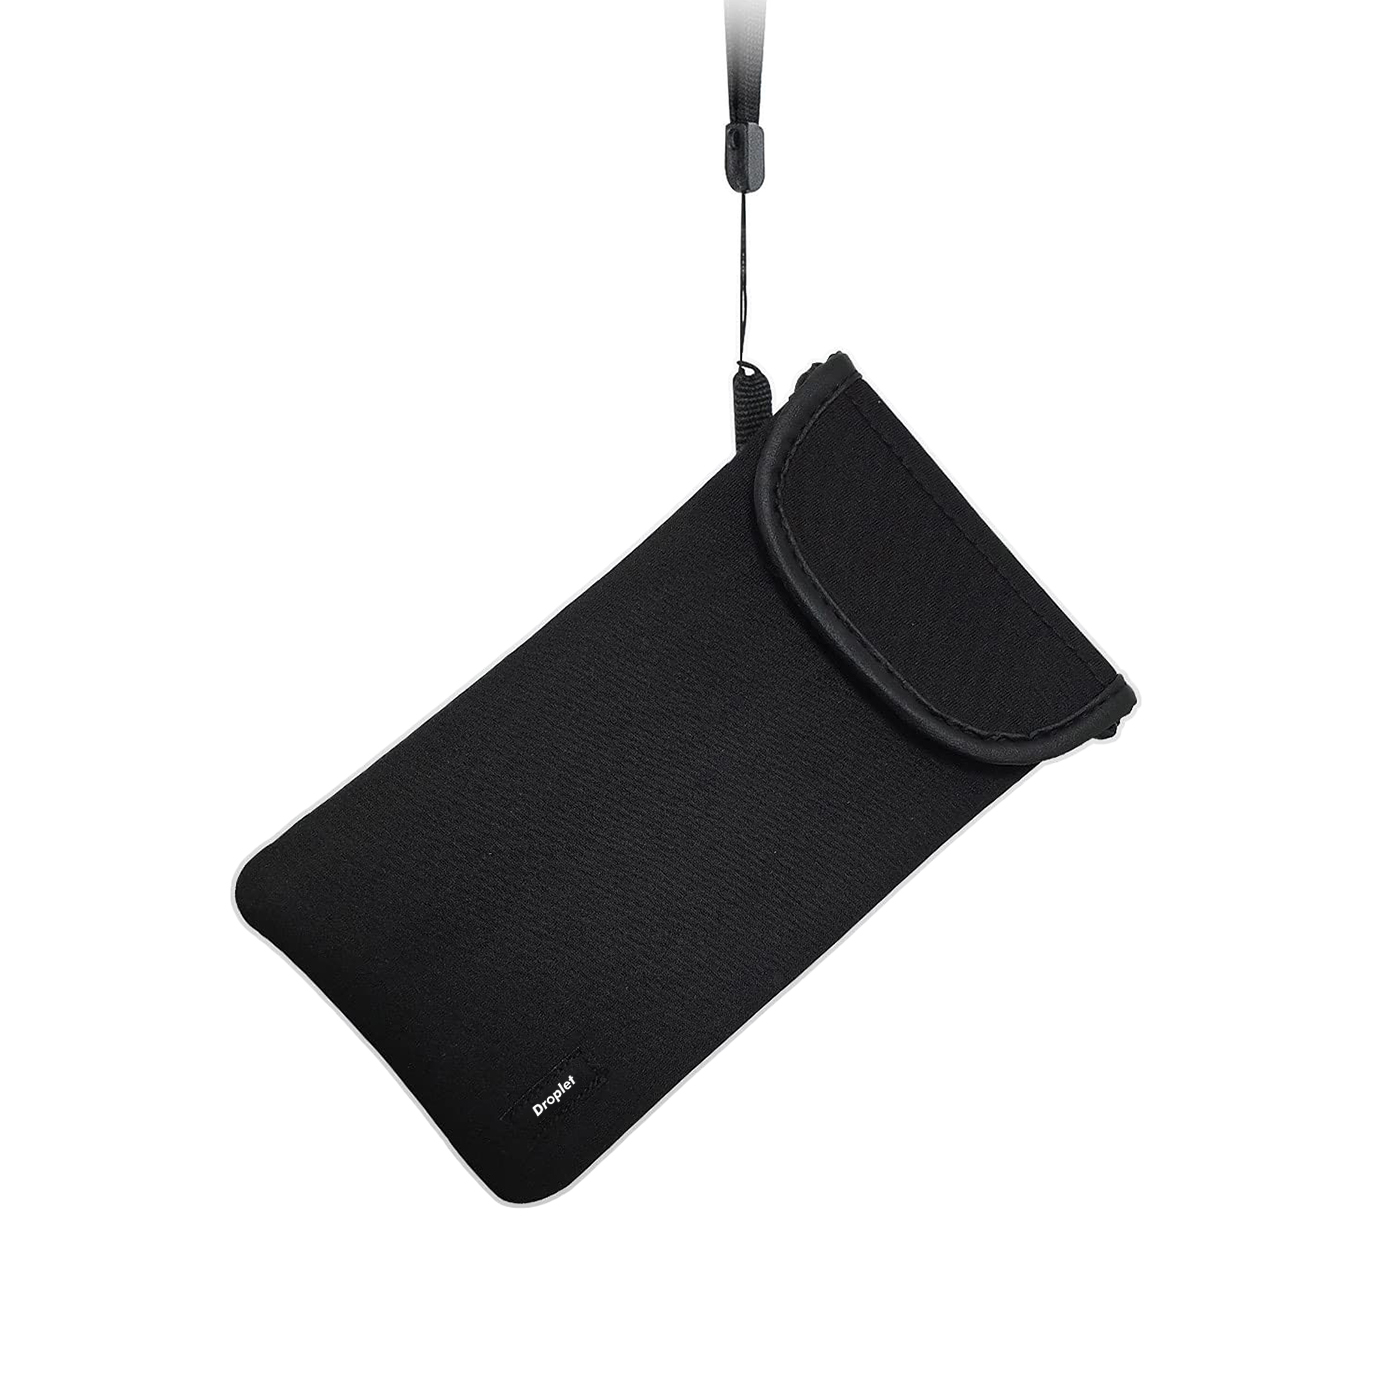 Neoprene Smartphone Pouch With Carabiner1